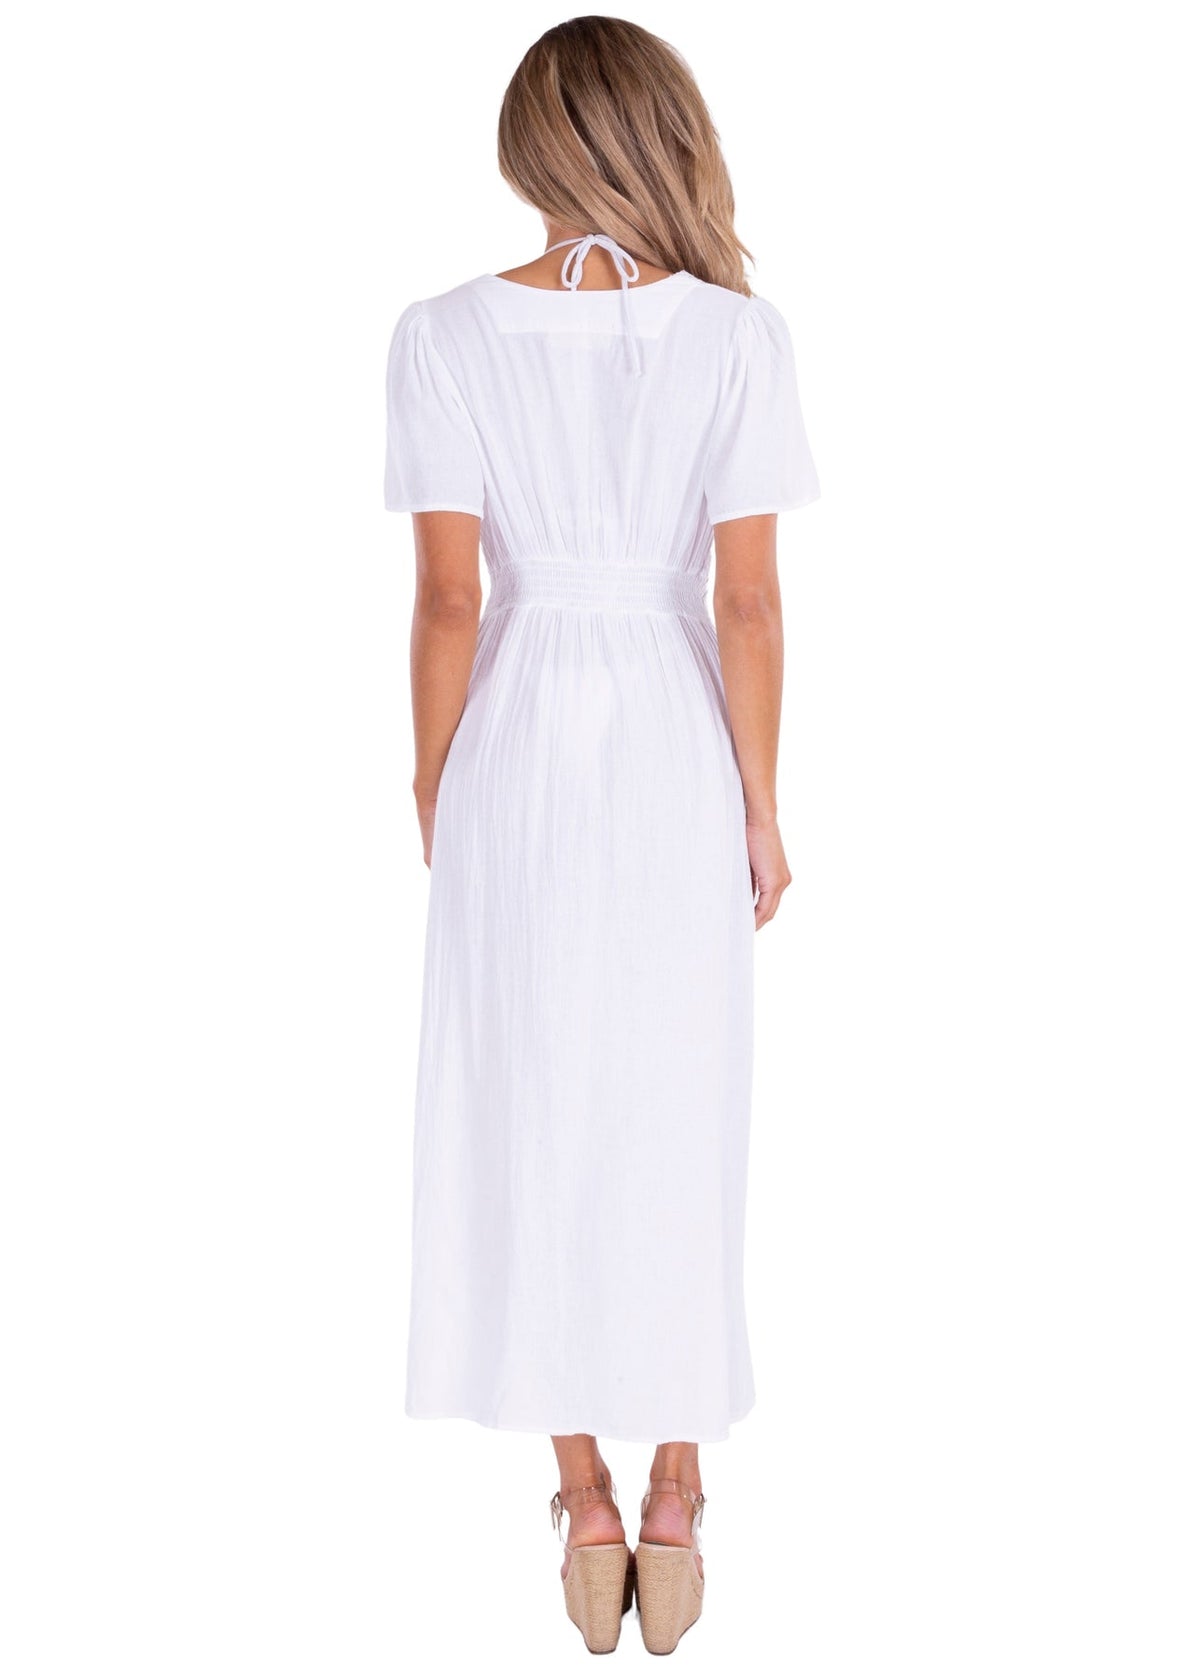 "Seaspice" White 100% Cotton Long Tie Front Cap Sleeve Duster Cover-up